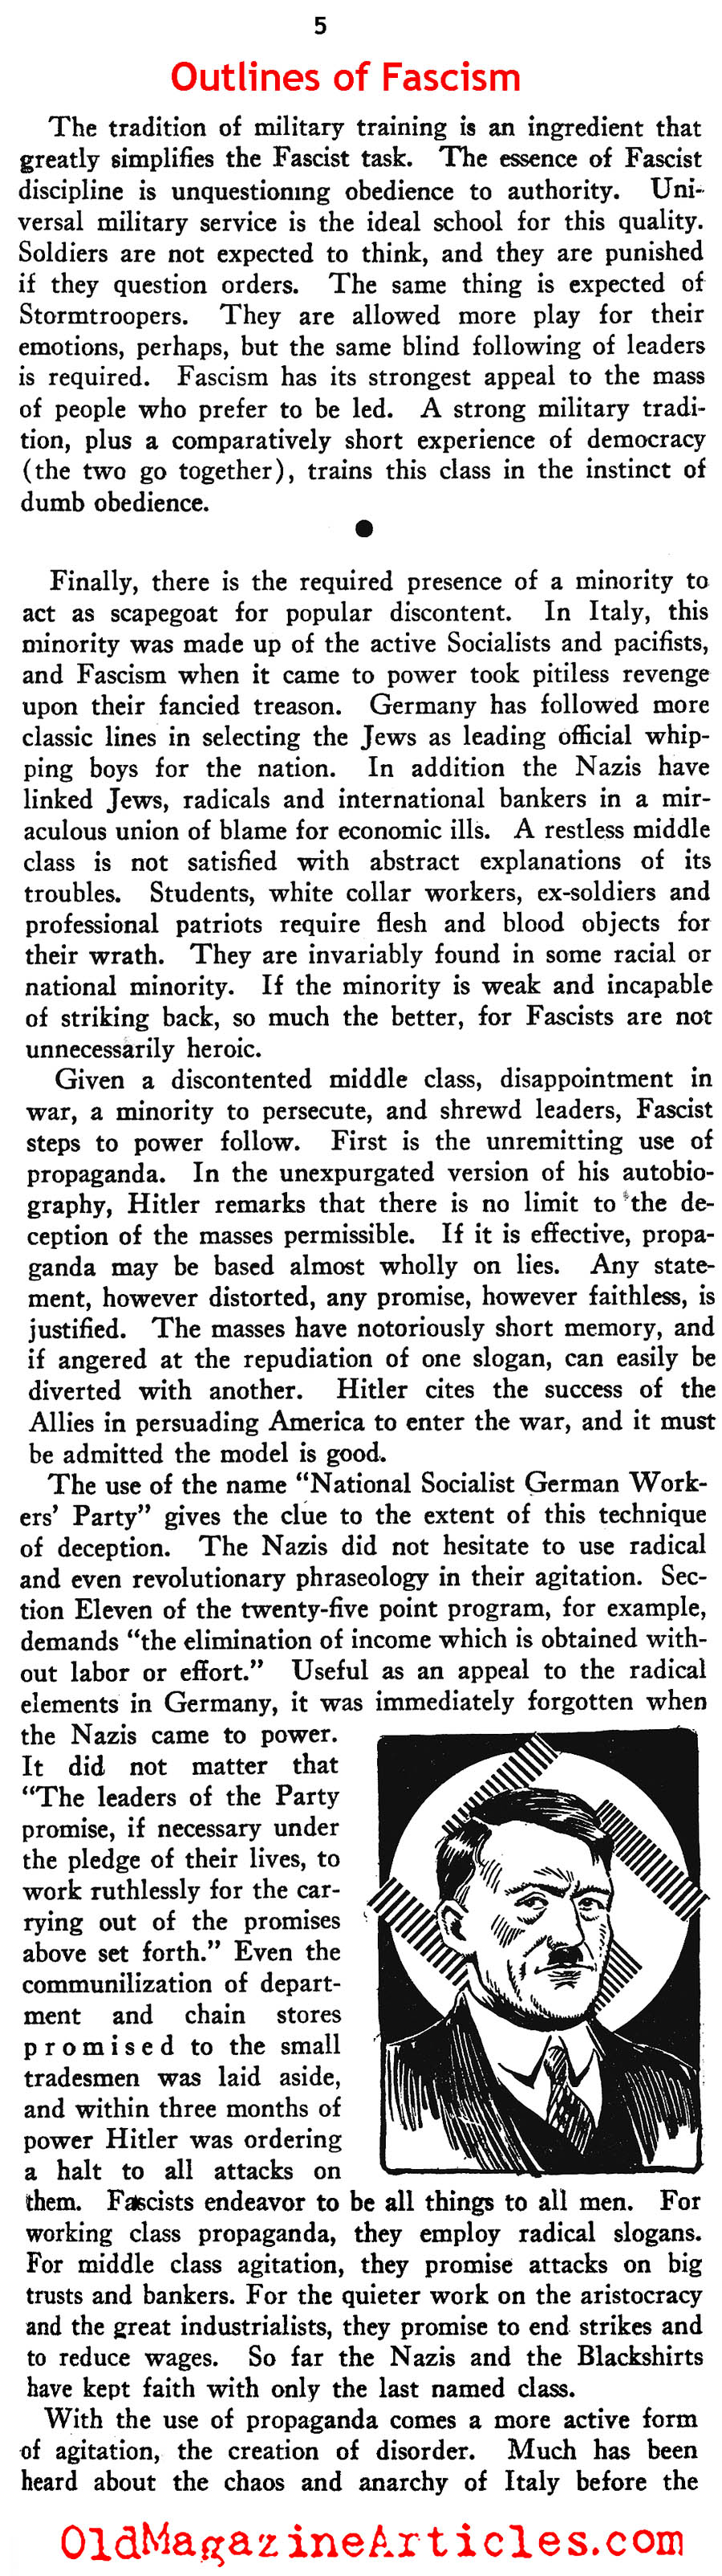 ''Outlines of Fascism'' (New Outlook Magazine, 1934)